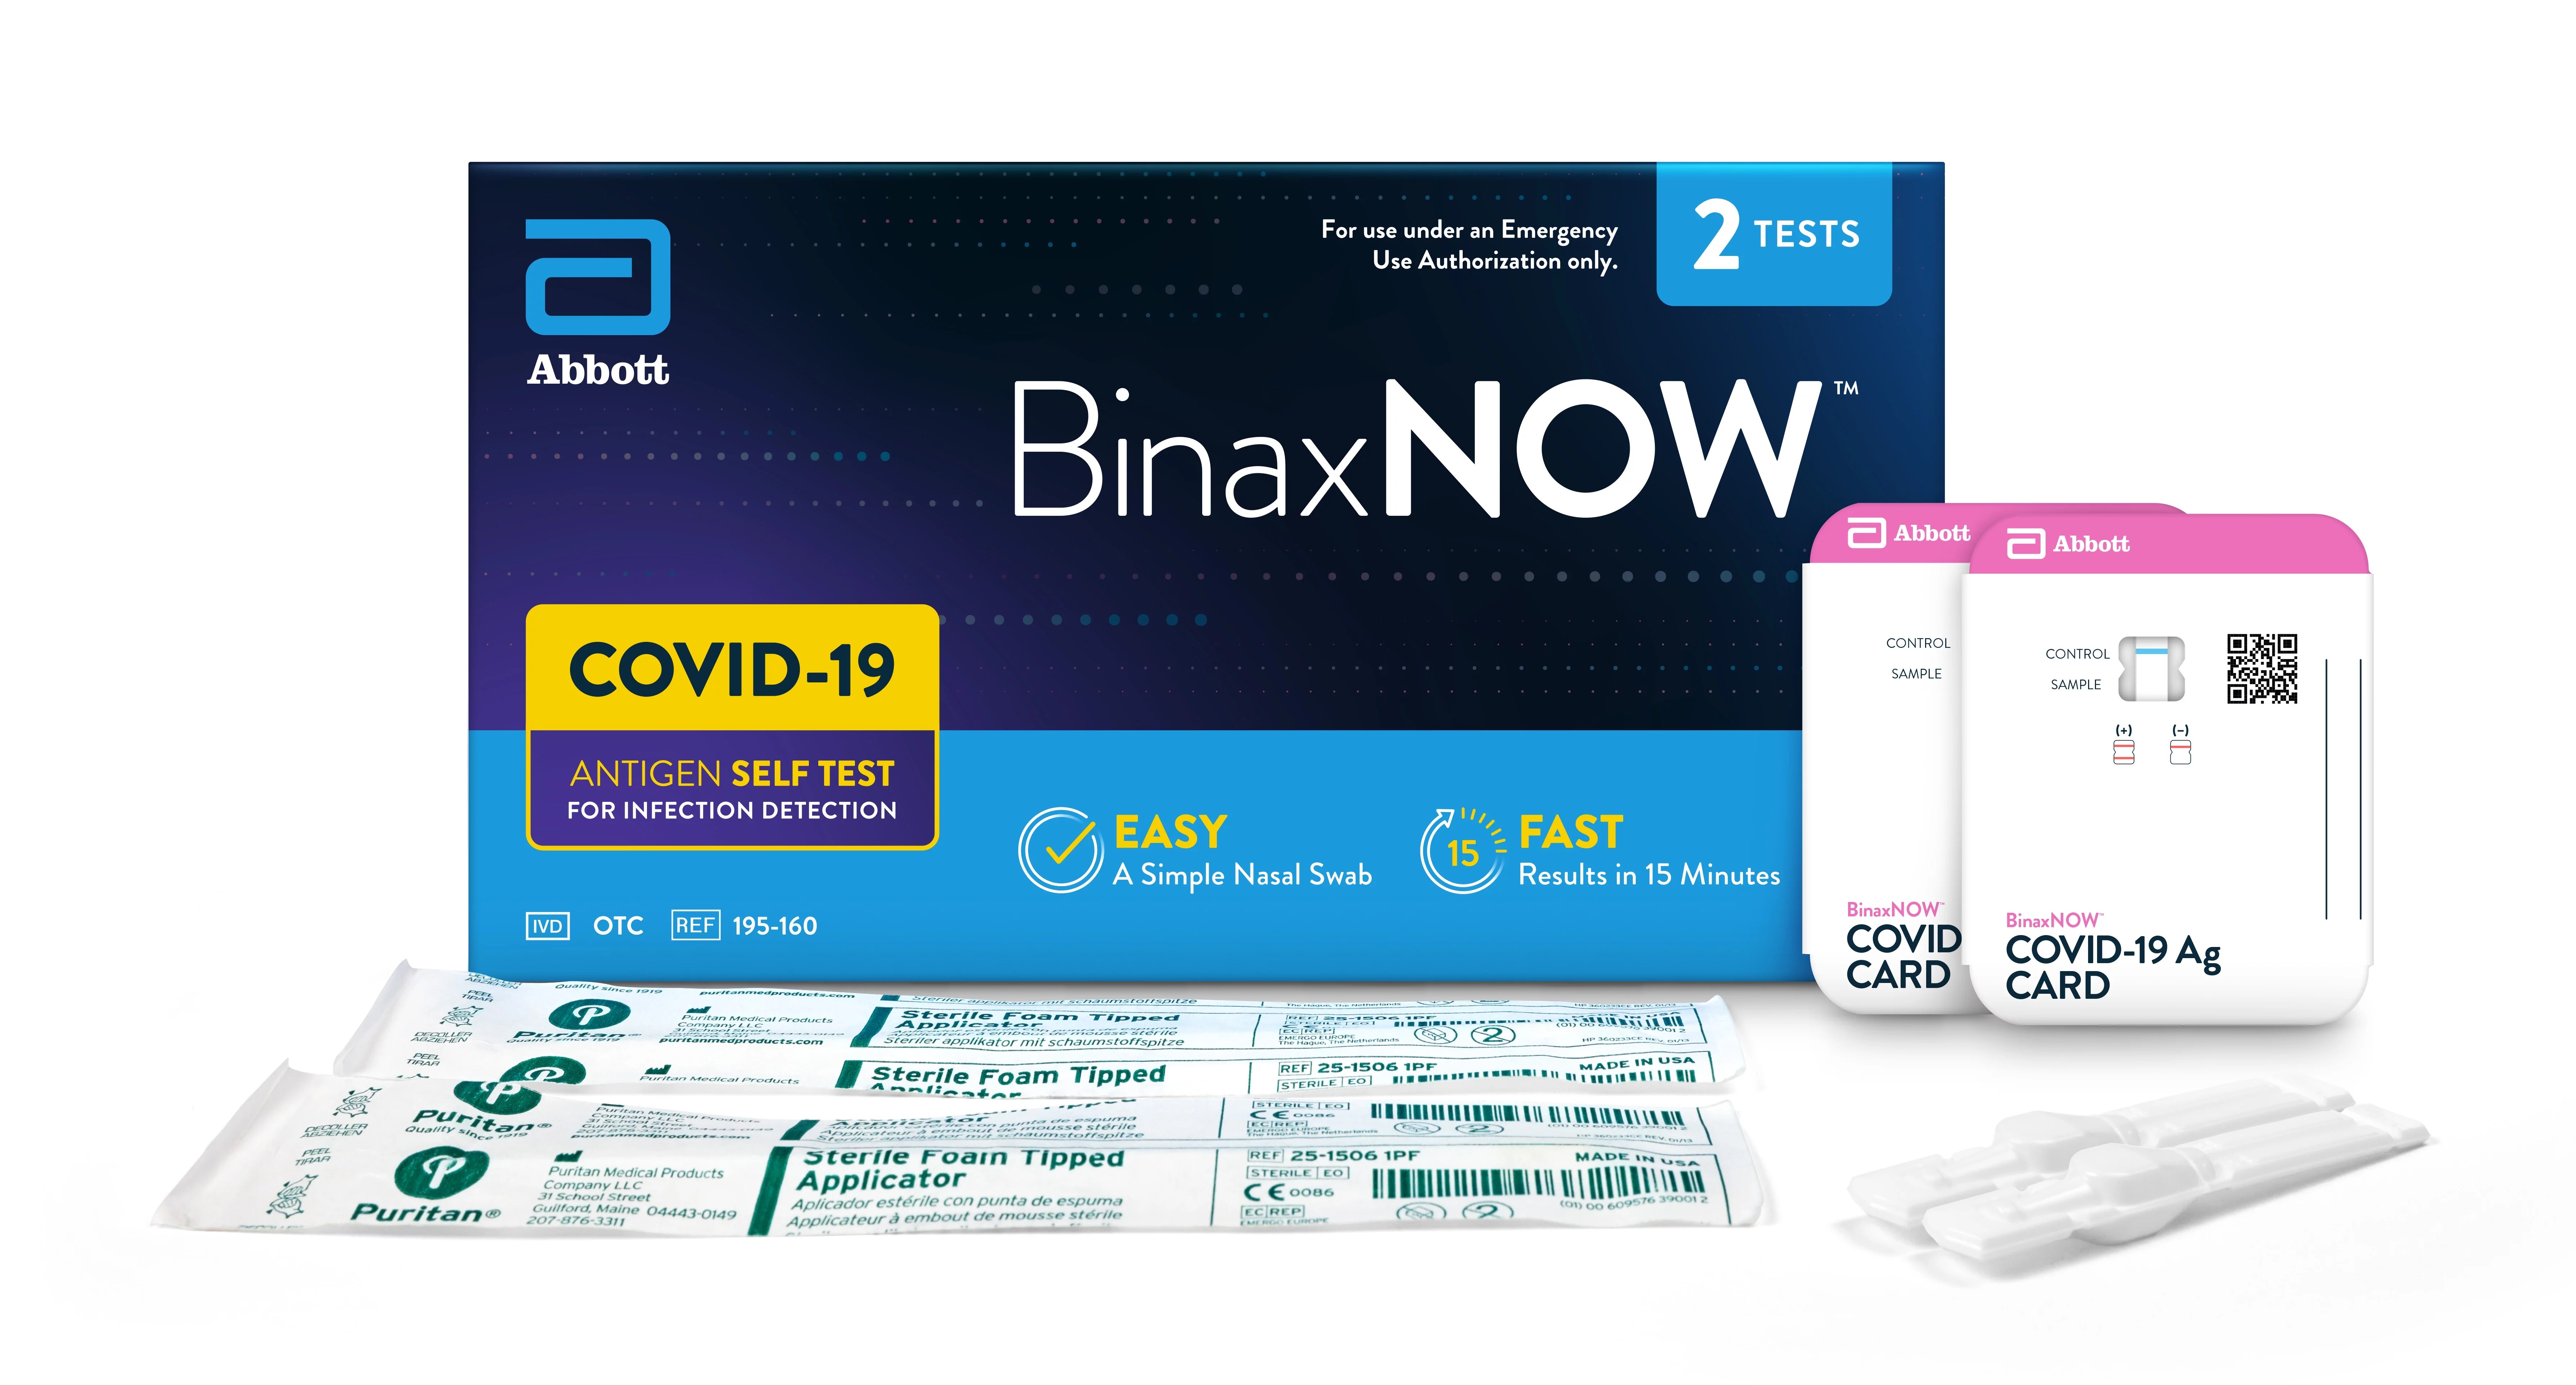 BinaxNOW COVID‐19 Antigen Self Test, 1 Pack, Double, 2-count, At Home COVID-19 Test, 2 Tests - image 3 of 11